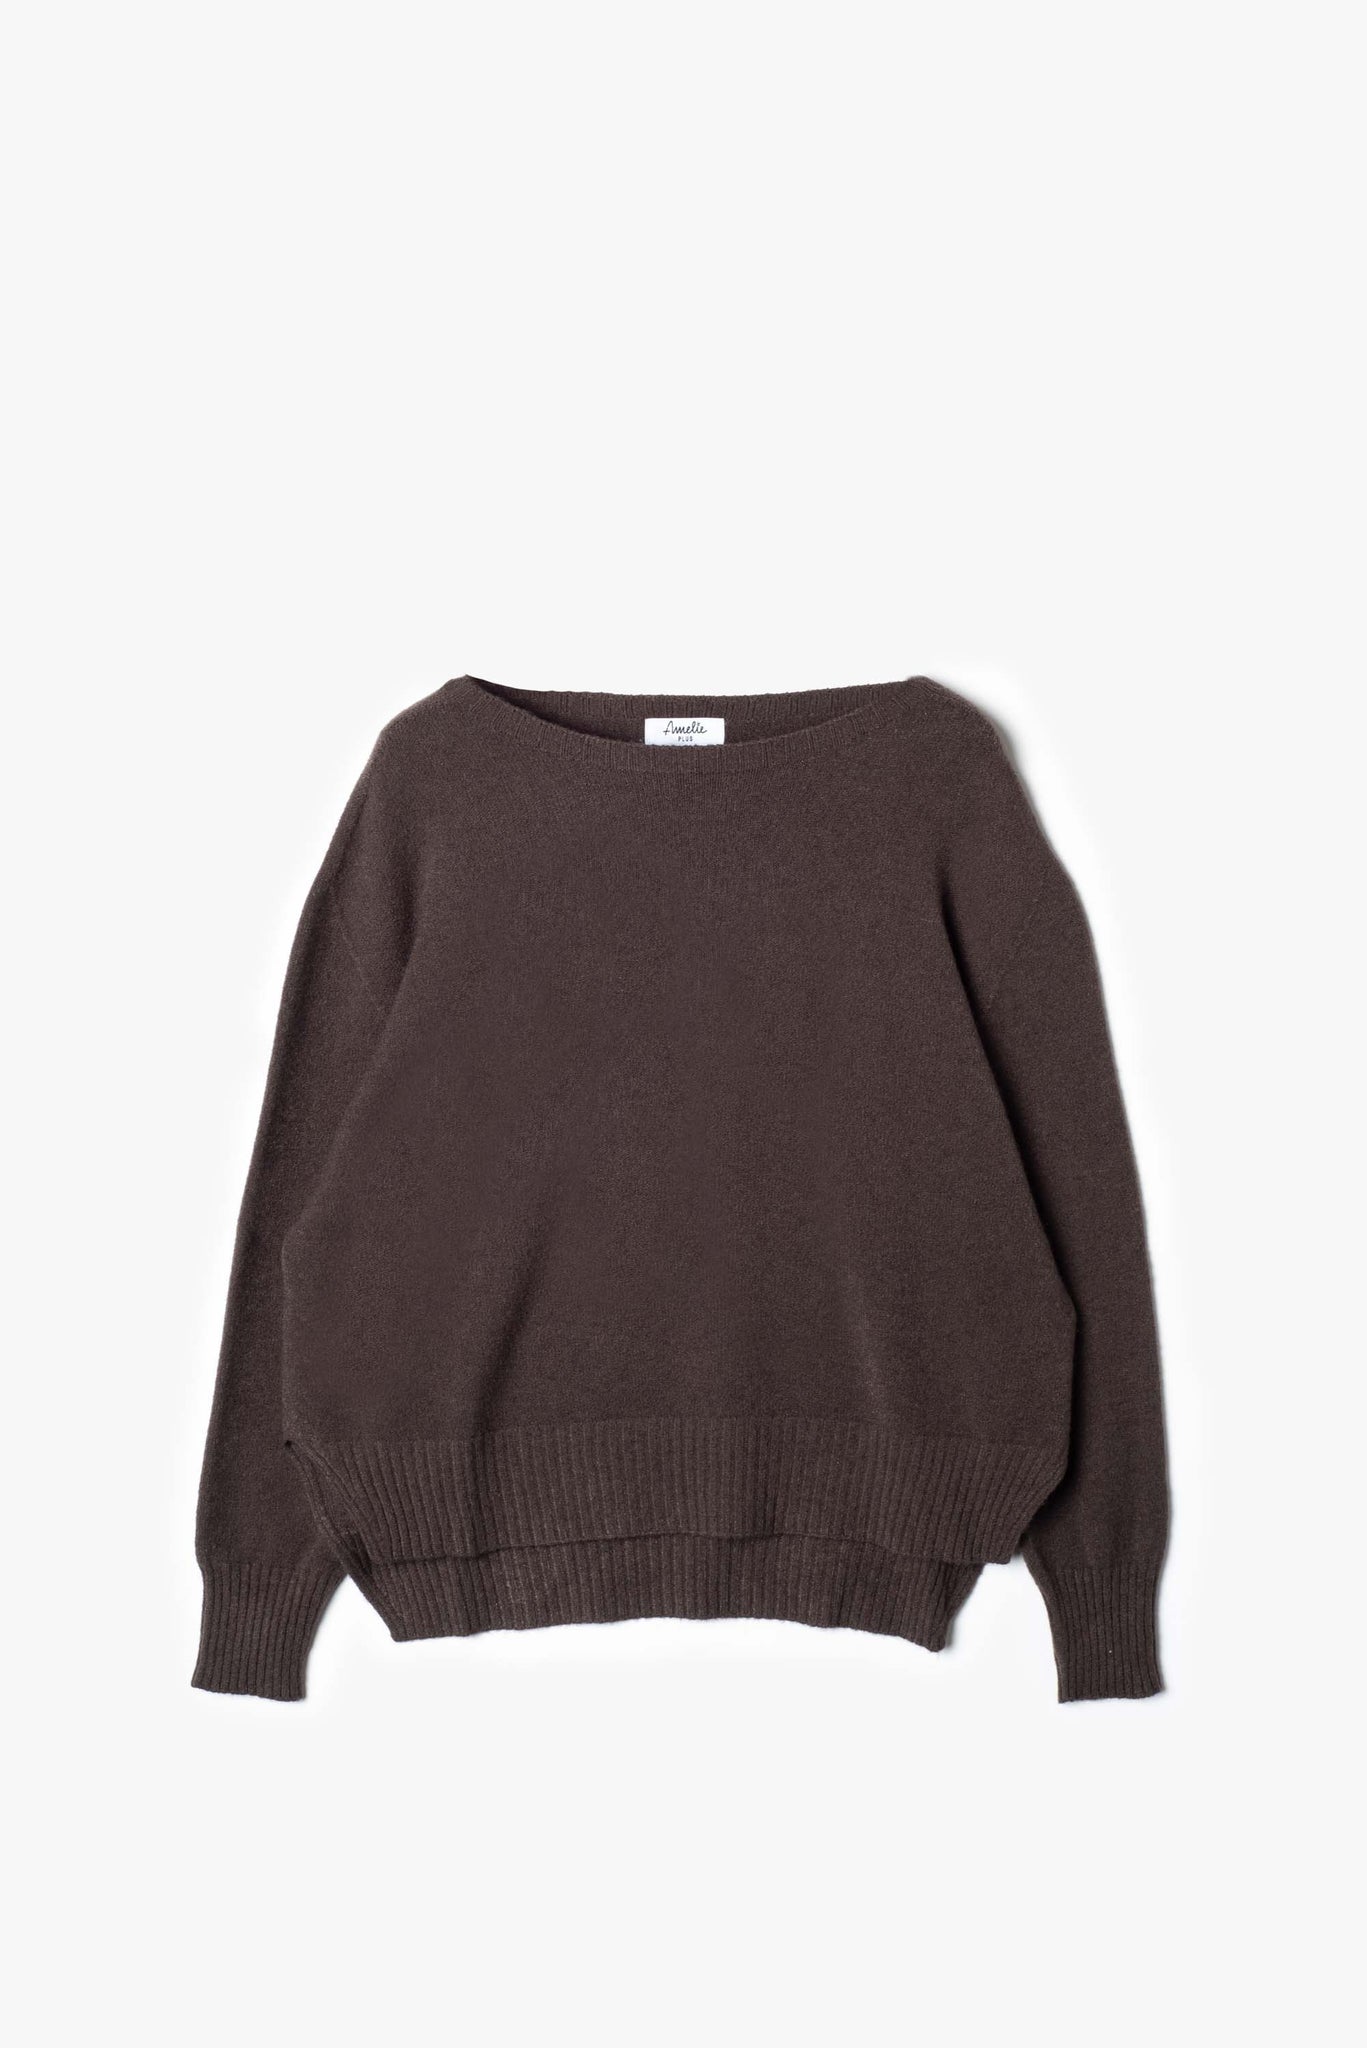 Asymmetrical pullover with side slits